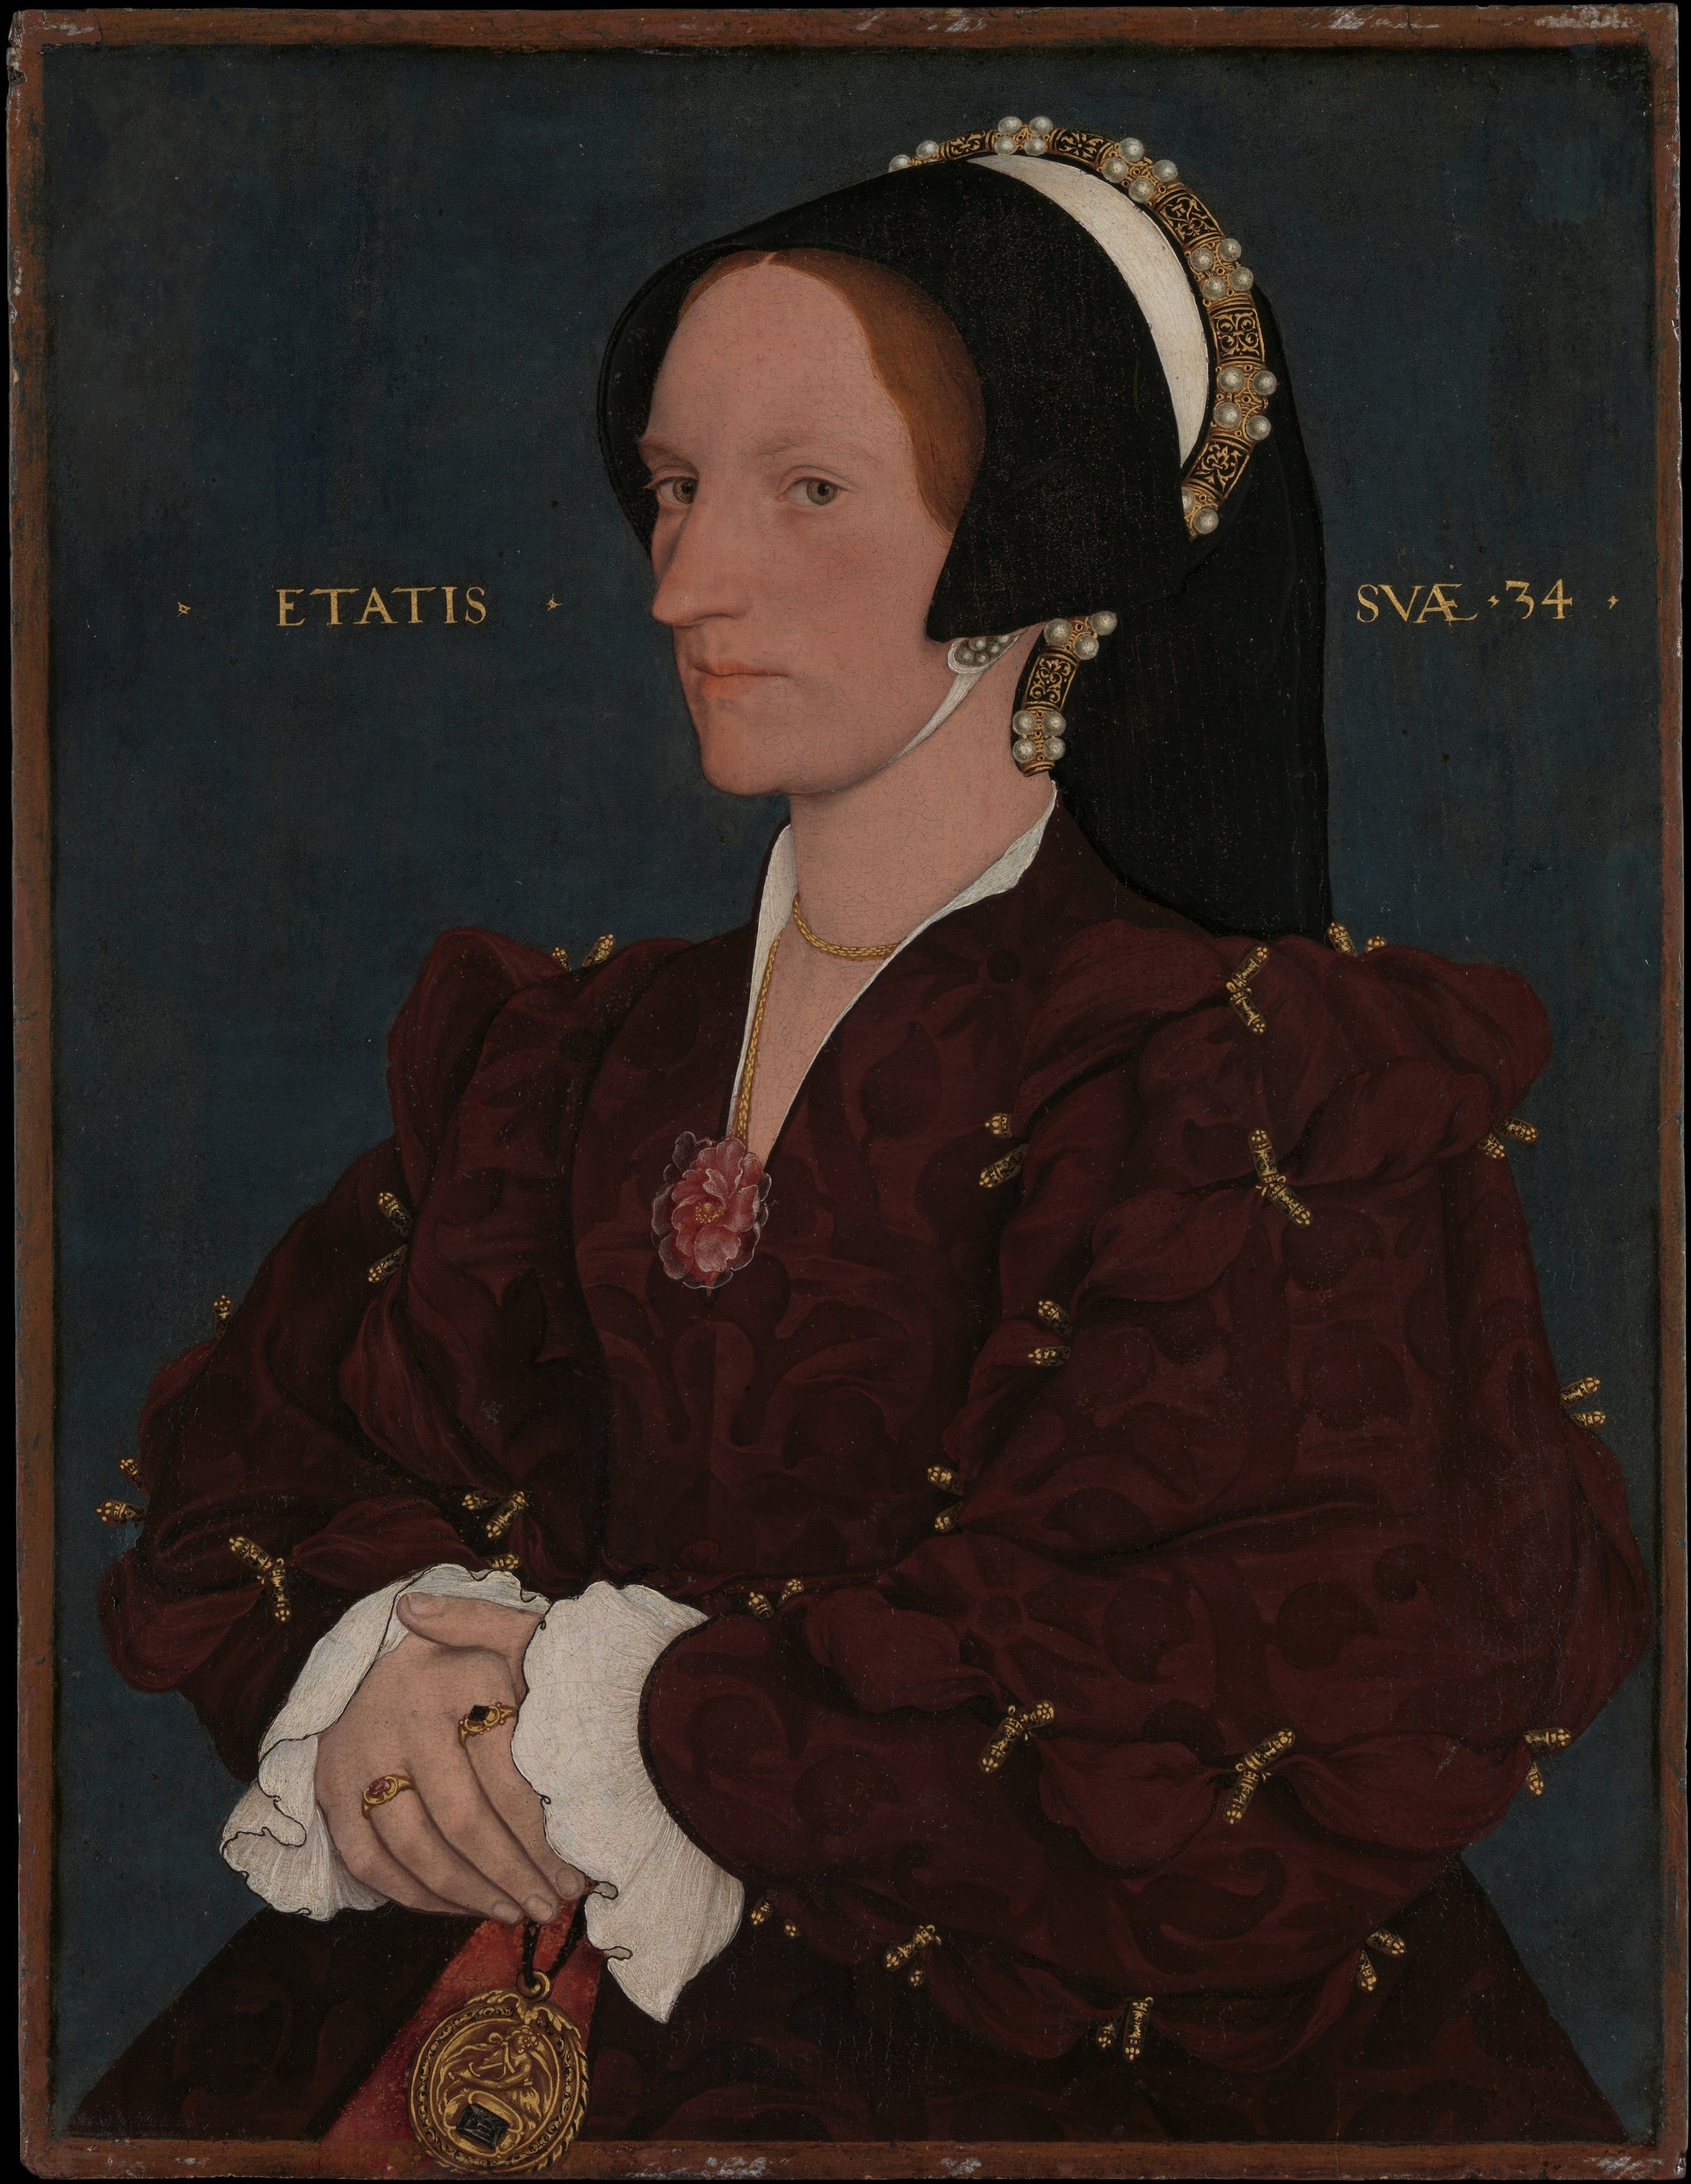 Margaret Wyatt, Lady Lee by Hans Holbein the Younger - 1540 - 42,5 x 32,7 εκ. 